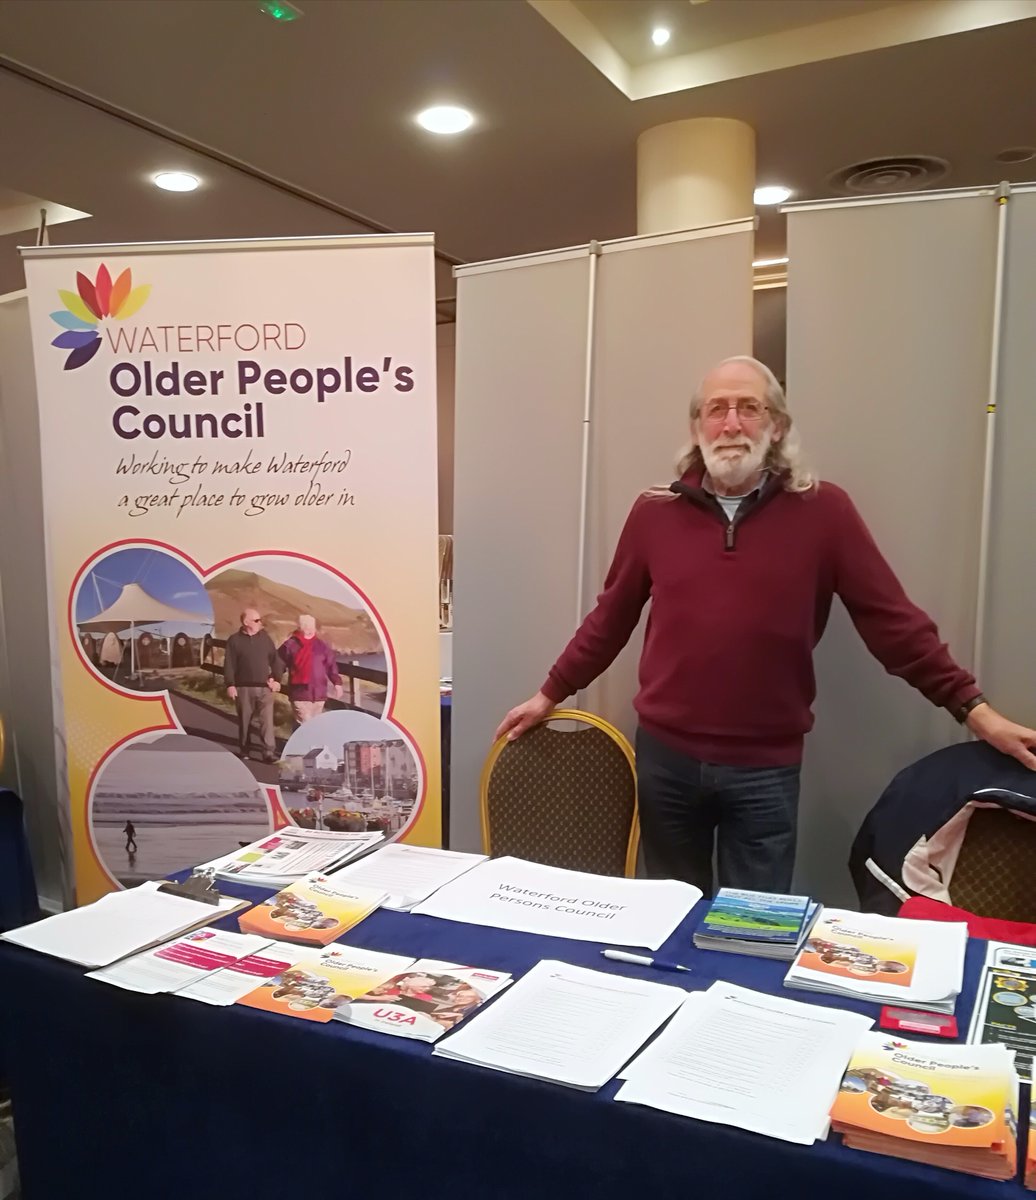 Two of our members Bernadette Phillips @BPhillipsWriter and @StanPhillips today at the Southeast 50plus Expo at the @TowerHotel #Waterford Stan and Bernadette will both be Speakers at this Expo tomorrow at 1.30pm and 2.30pm. Come along to our stand and say hello. #positiveliving